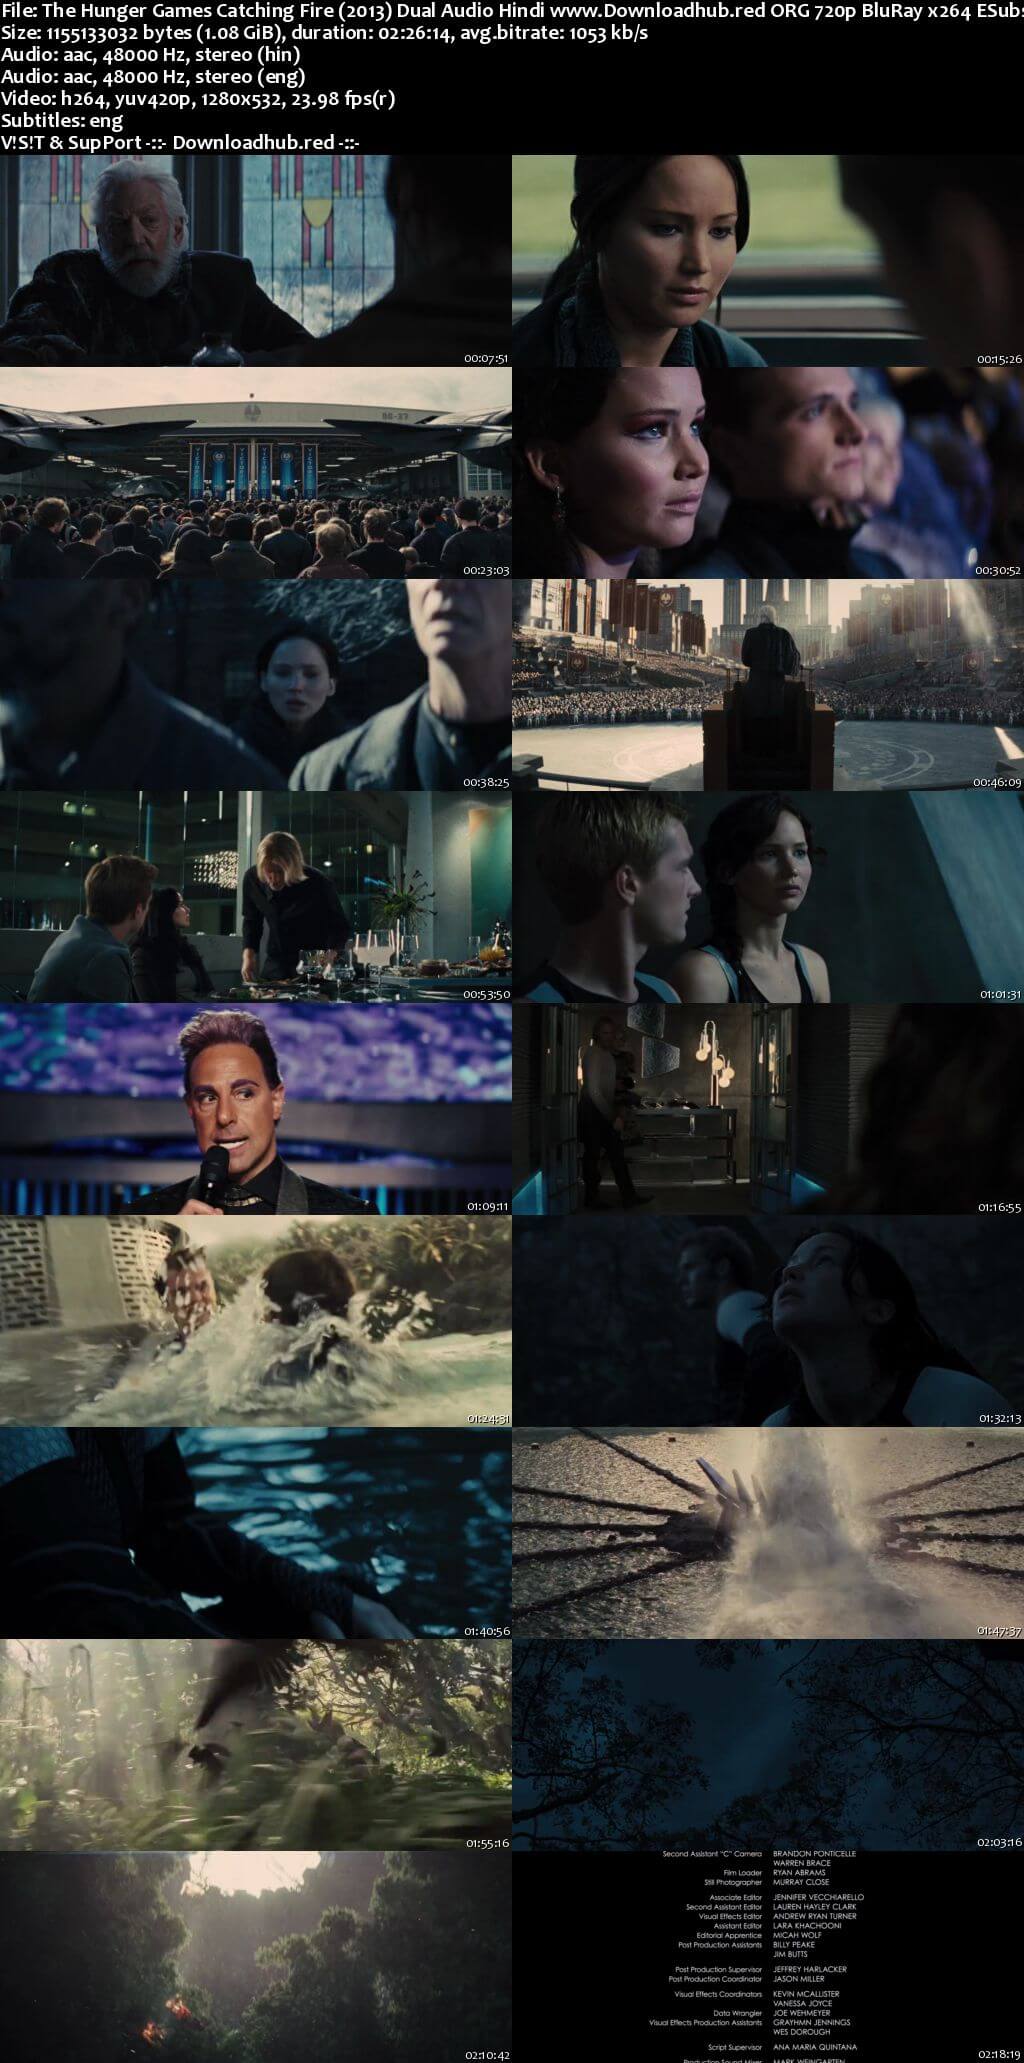 The Hunger Games Catching Fire 2013 Hindi Dual Audio 720p BluRay ESubs